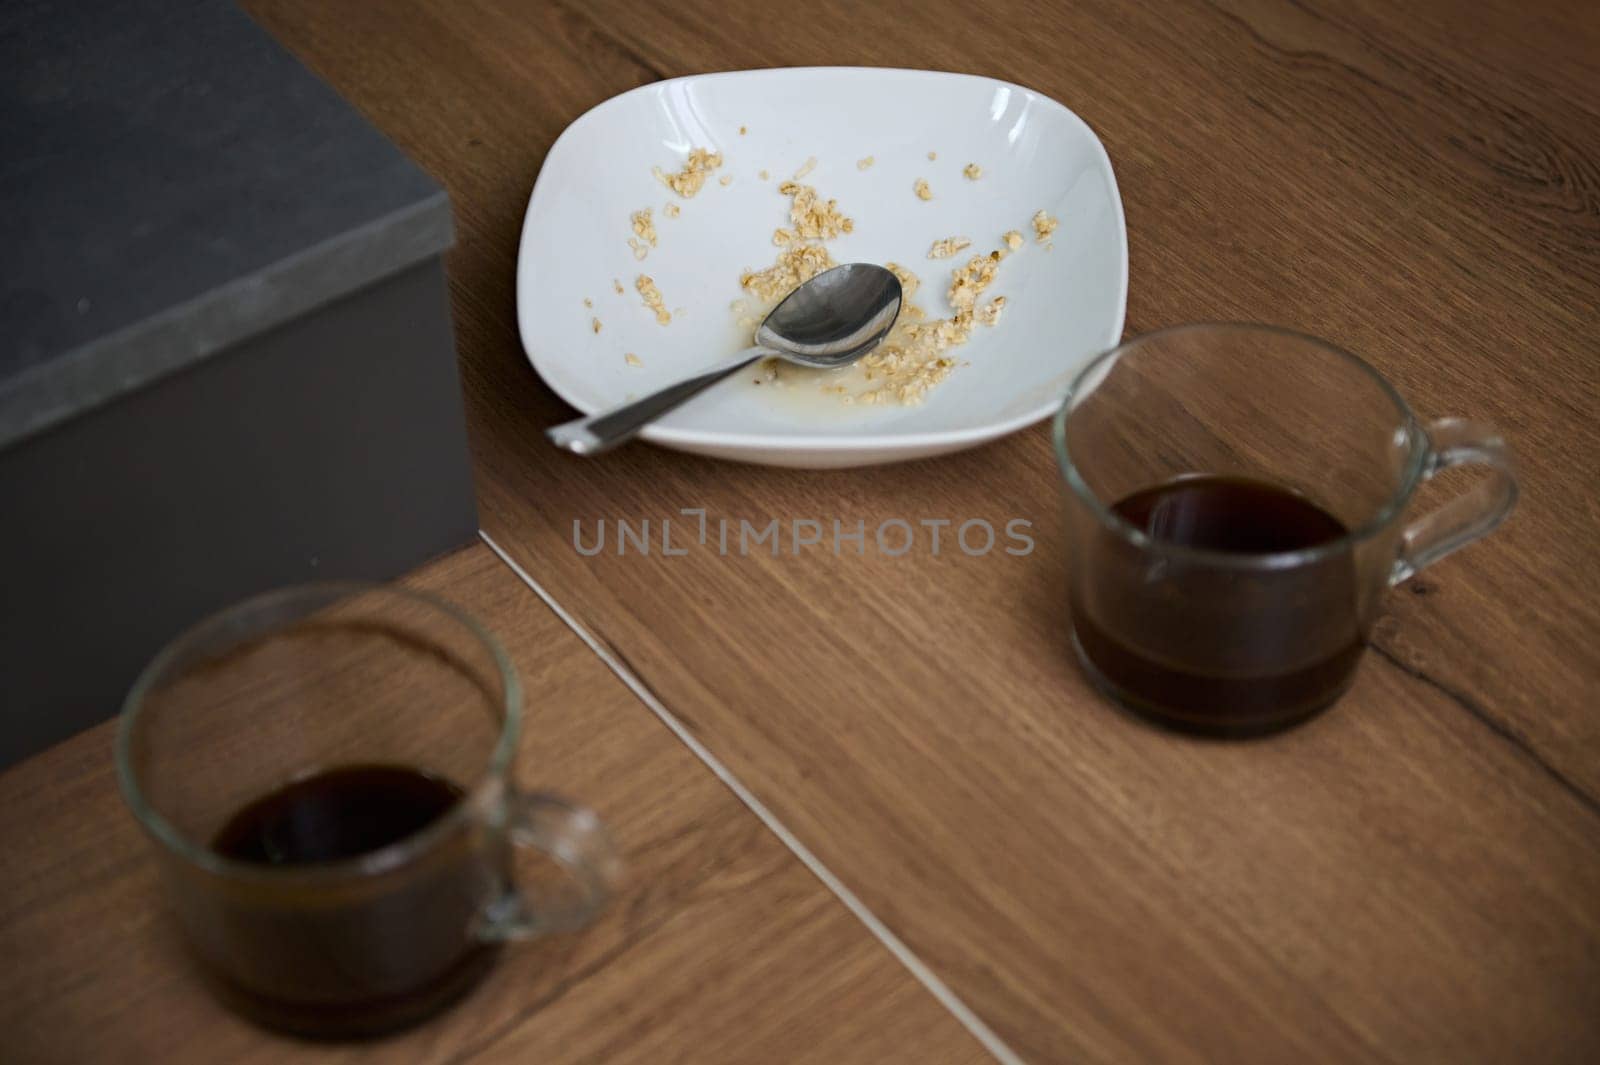 Overhead view of left over of breakfast in white ceramic bowl and two glass cups of unfinished coffee on the table